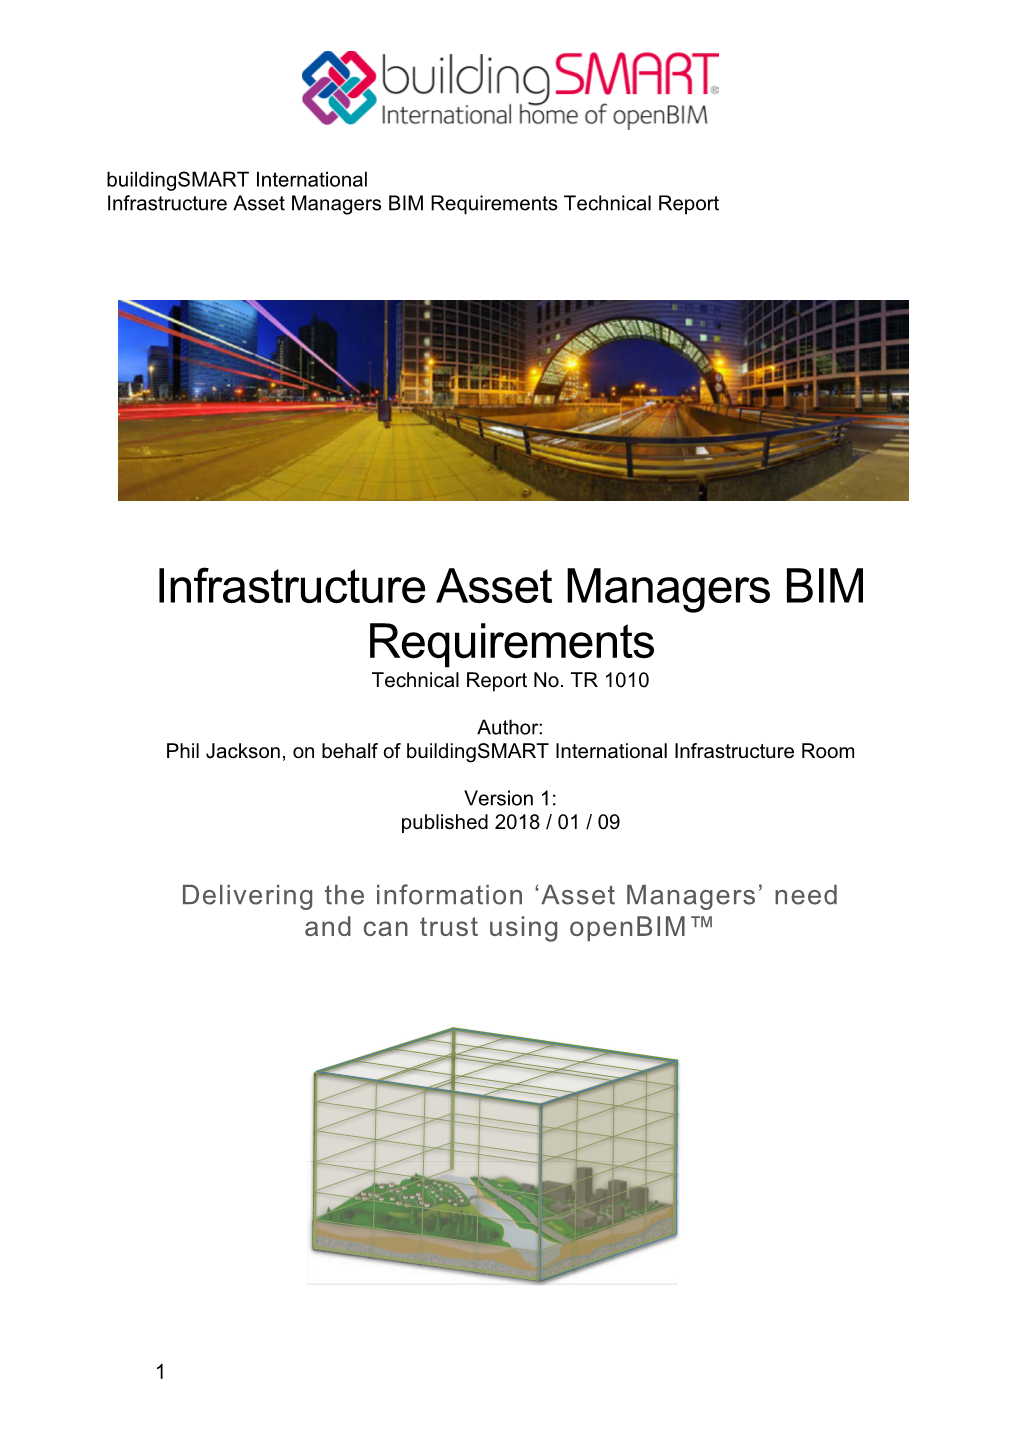 Infrastructure Asset Managers BIM Requirements Technical Report